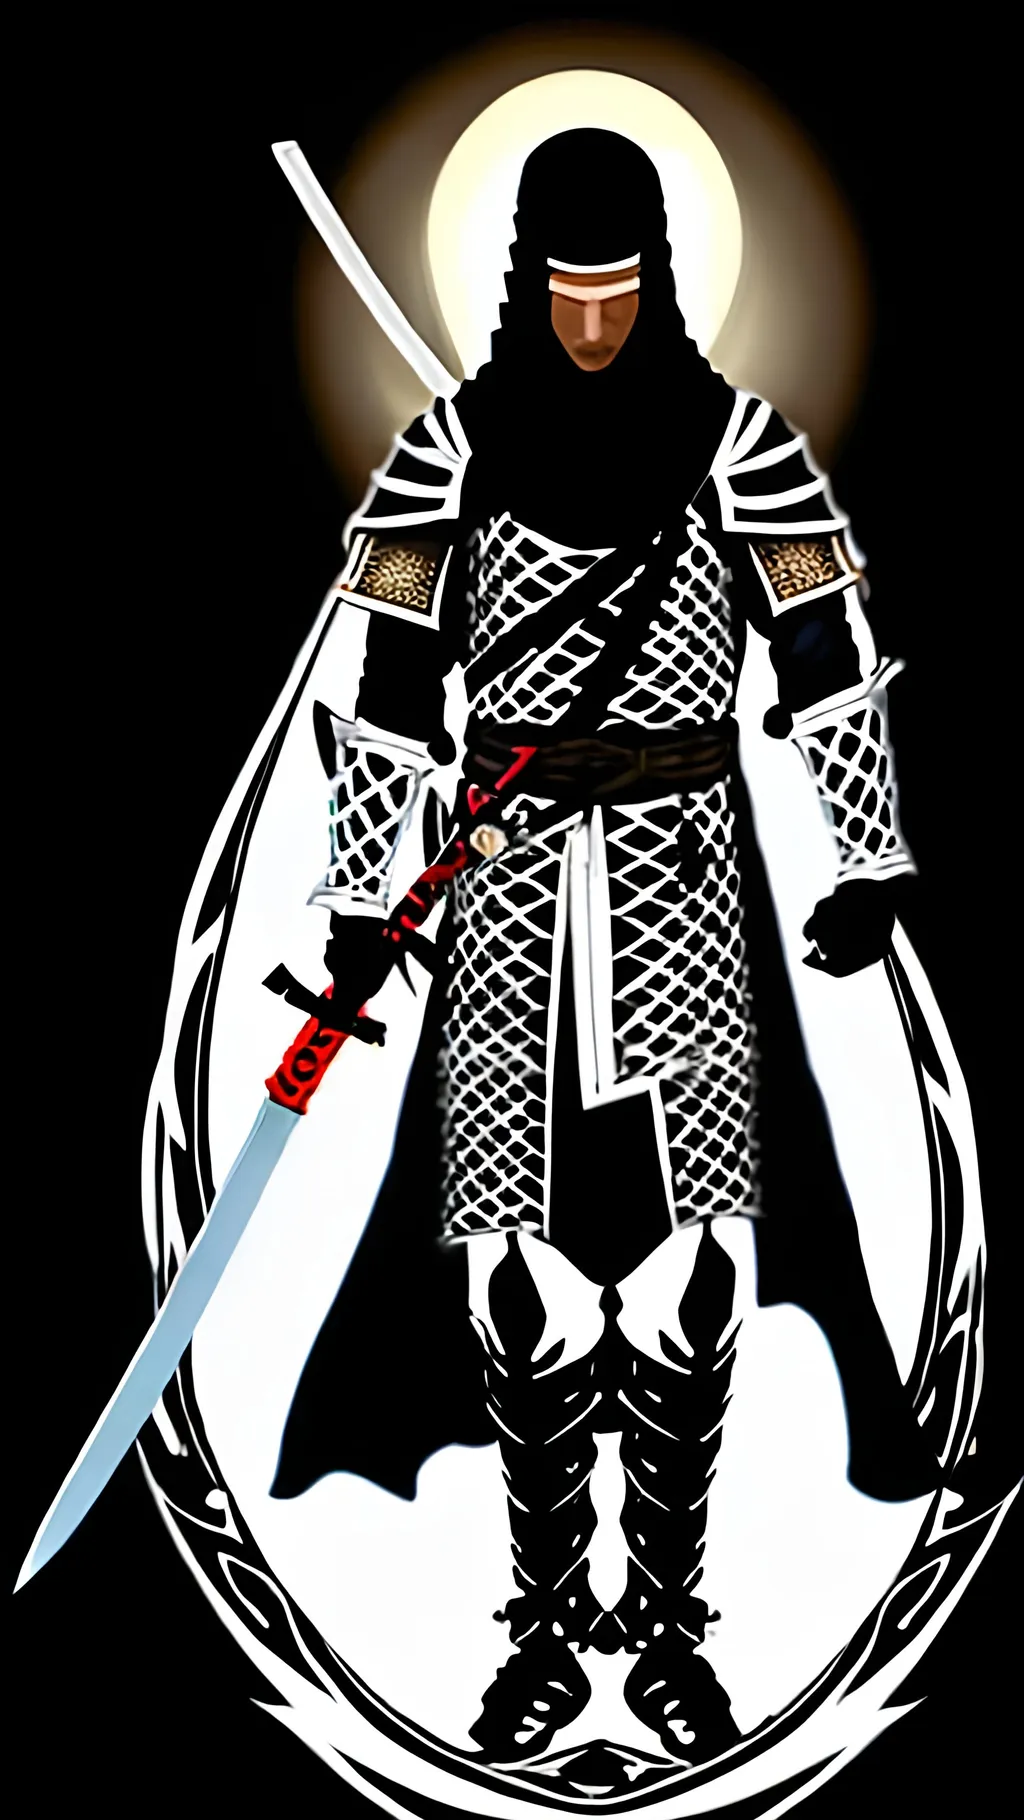 Prompt: Arabian man wearing white ninja , ride Black Arabians beautiful horse ,
He is light is shining , with his long two hand sword 8n his back , he is a nice unknown knight , wearing like ninja but he is not a ninja he is a knight , hokd in his hand black flag write on it "there is no GOD accepting one"

This knight is one is chosen 